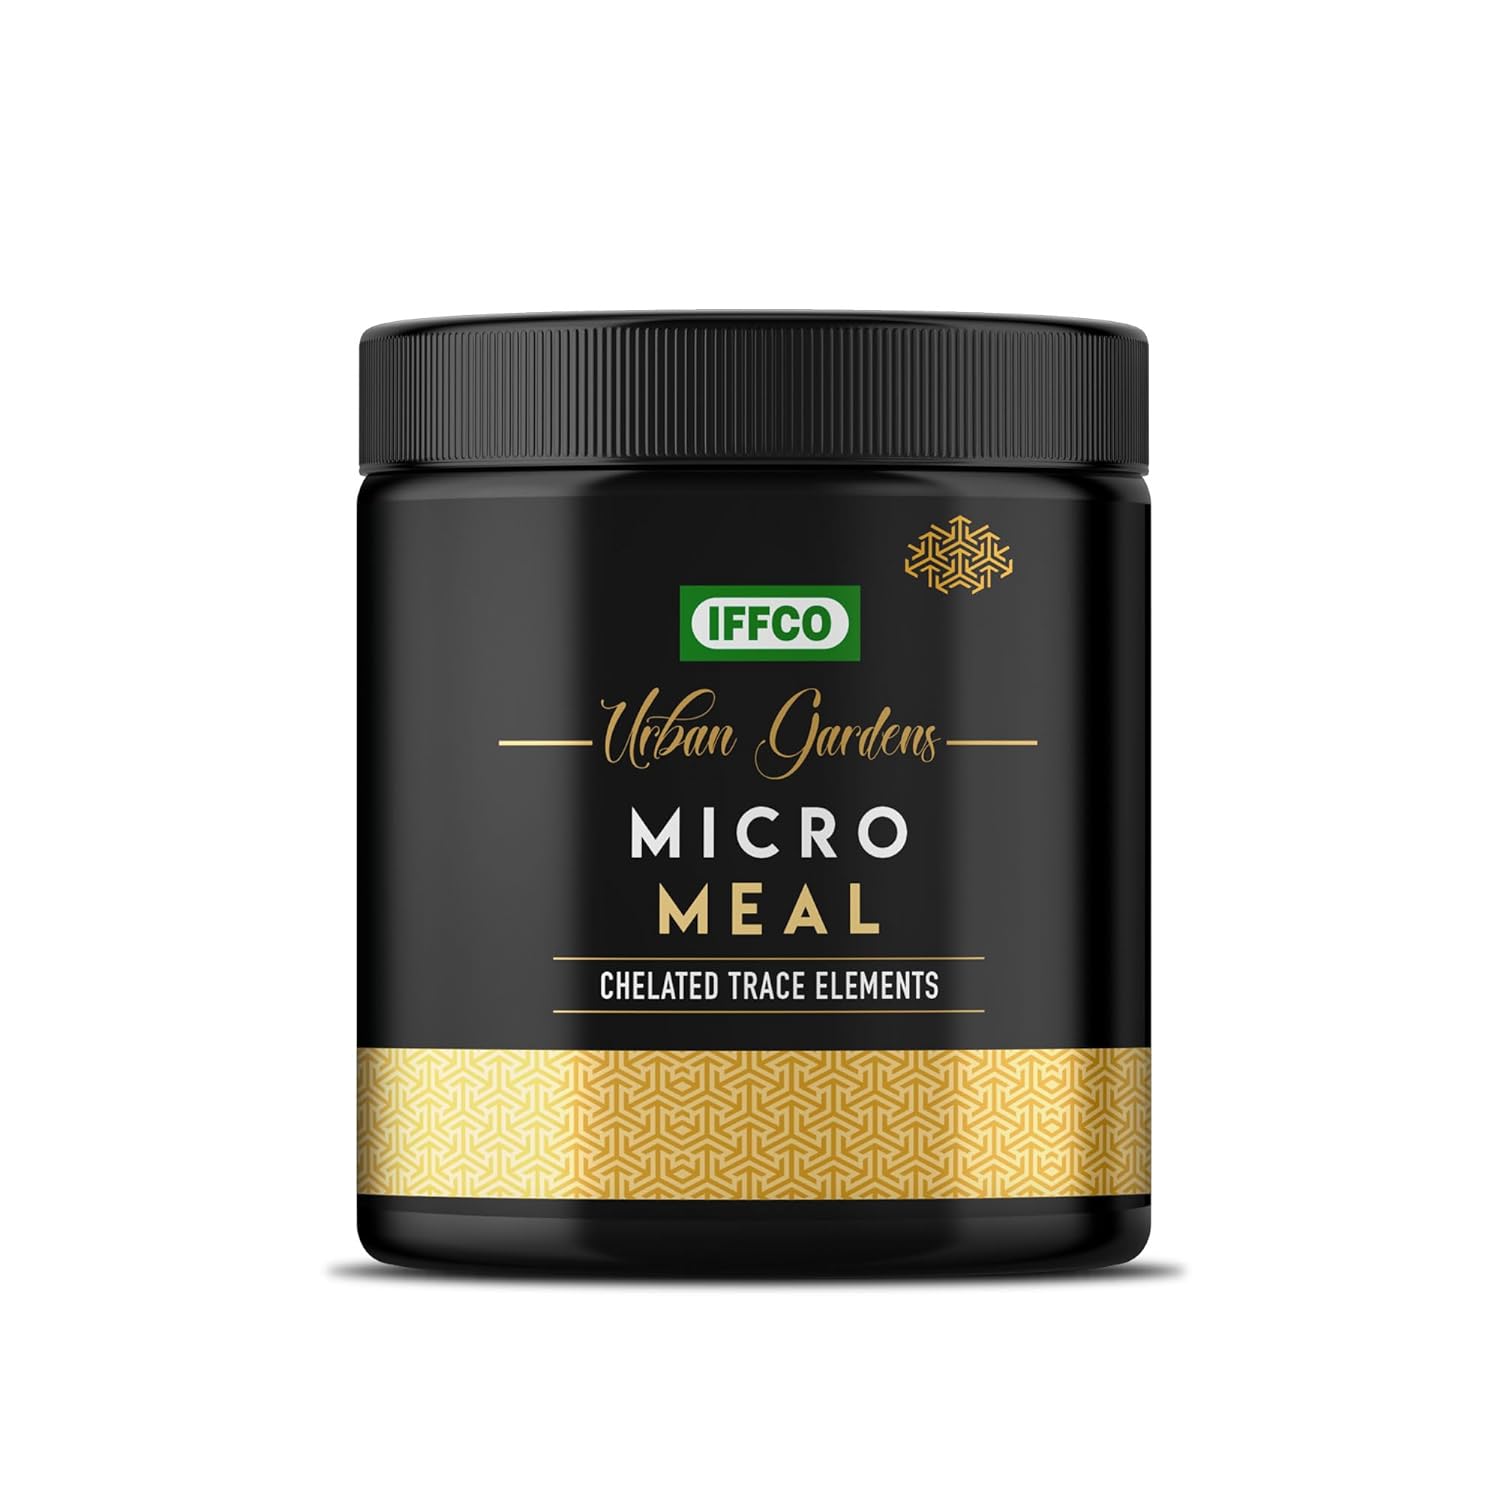 Iffco Micro Meal Micronutrient